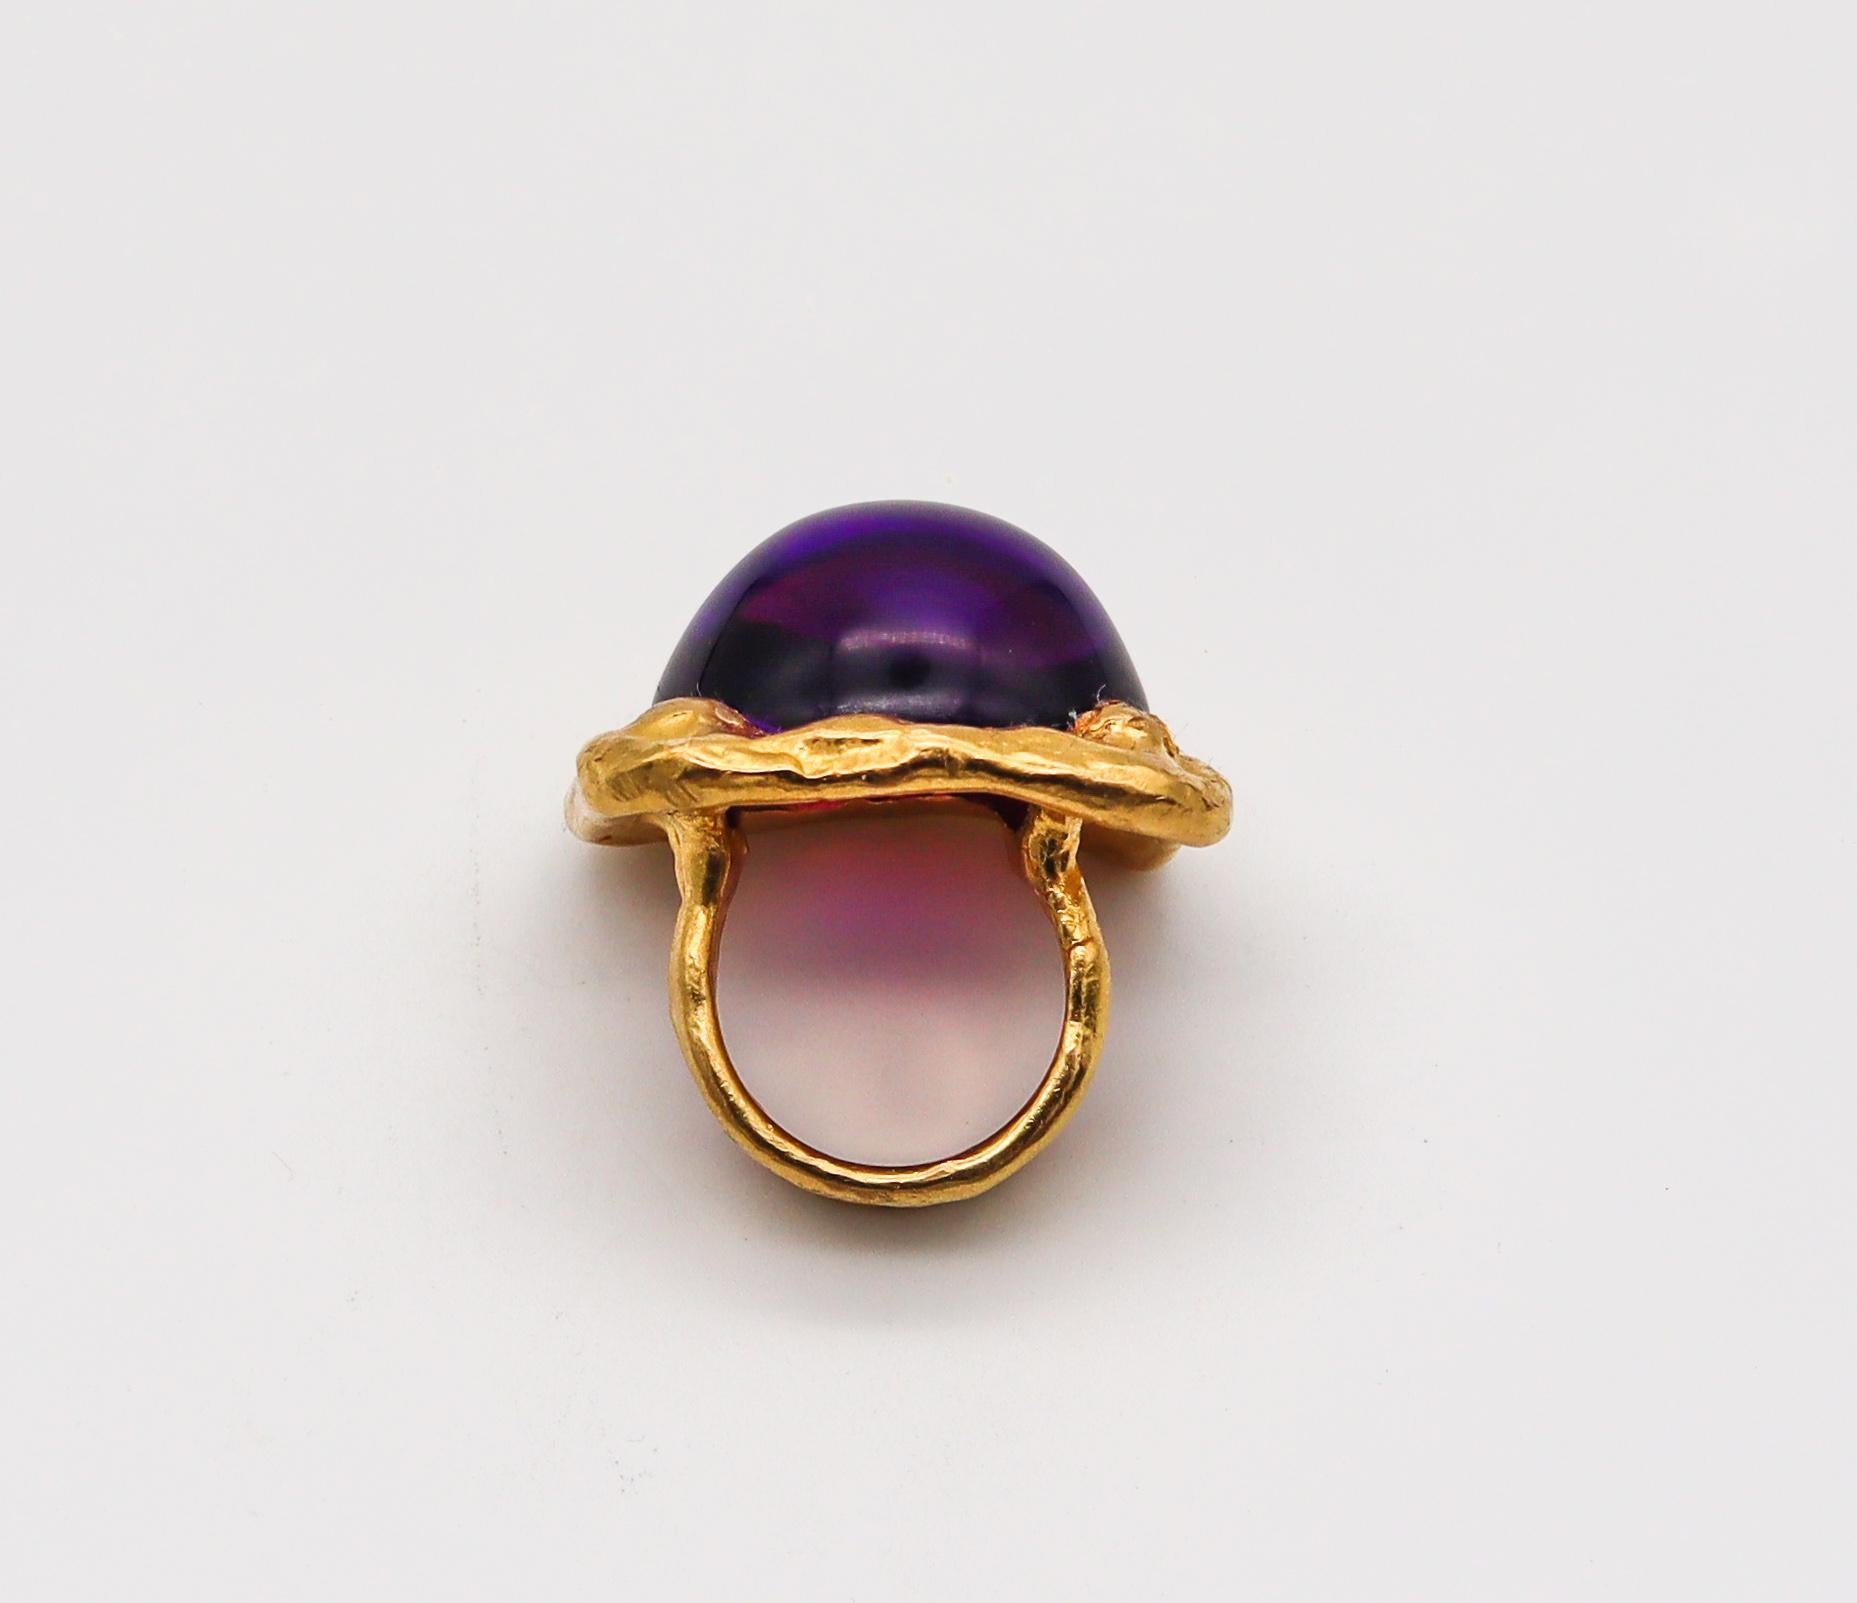 Jean Mahie 1977 Paris Rare Sculptural Cocktail Ring in Solid 22Kt Yellow Gold 1